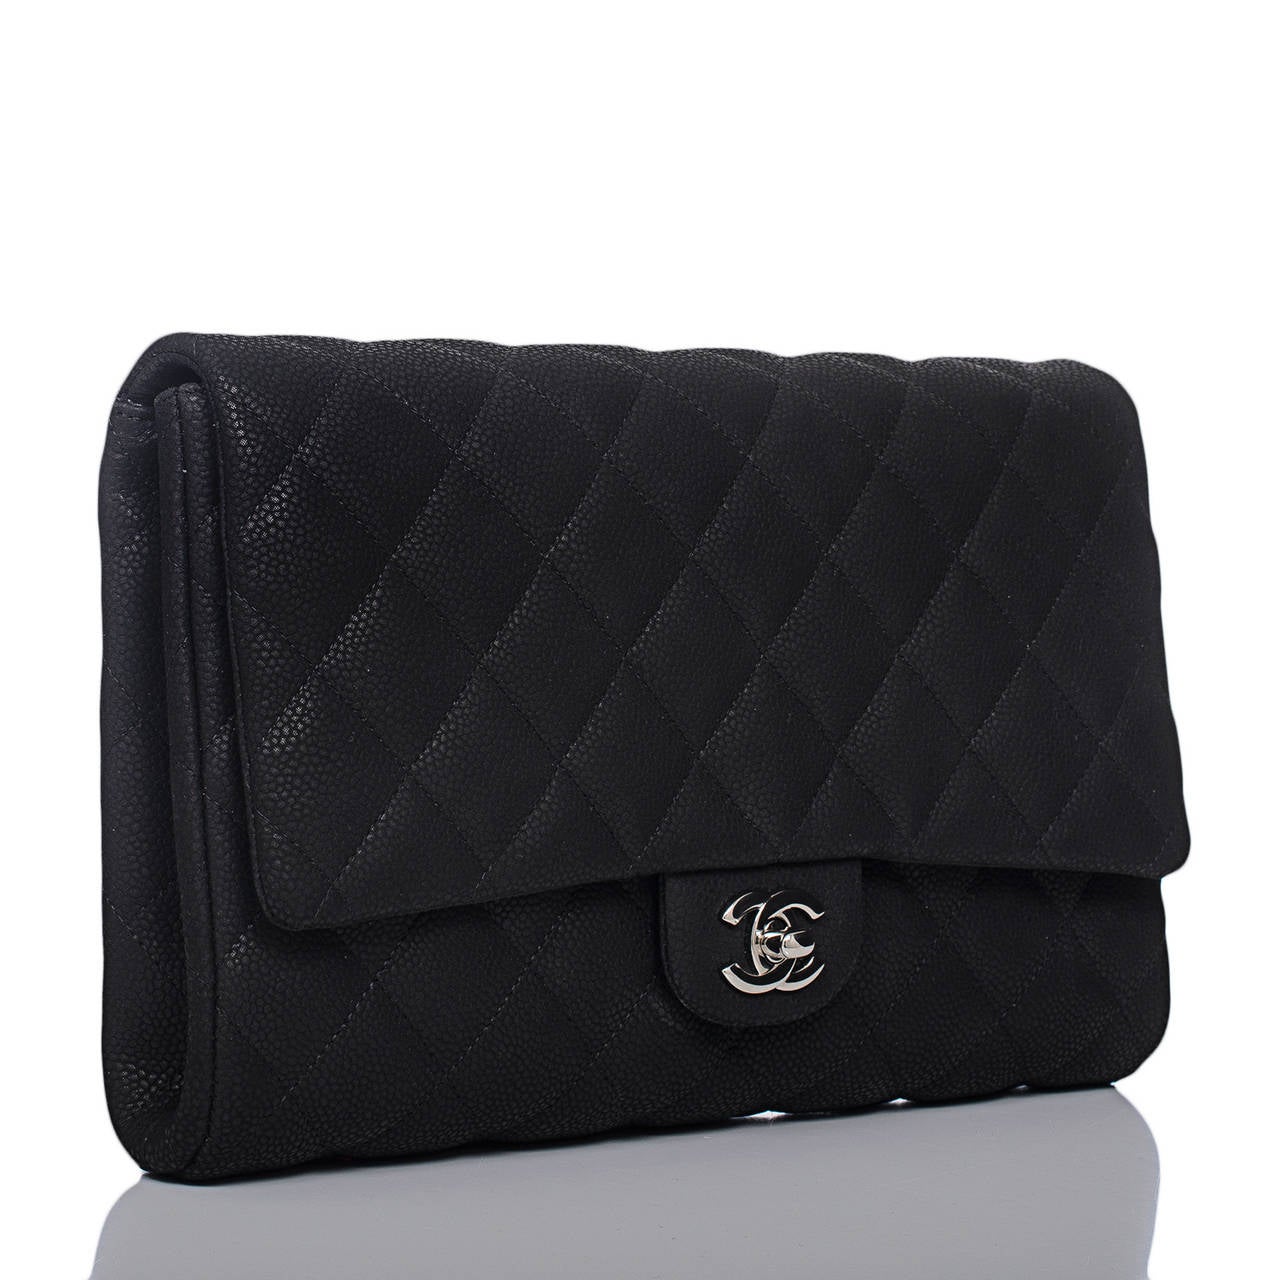 Chanel New Clutch With Chain of quilted black matte caviar leather with silver  tone hardware.   

This bag features CC turnlock closure, a rear envelope pocket, and interwoven silver tone chain link with black leather shoulder strap which can be